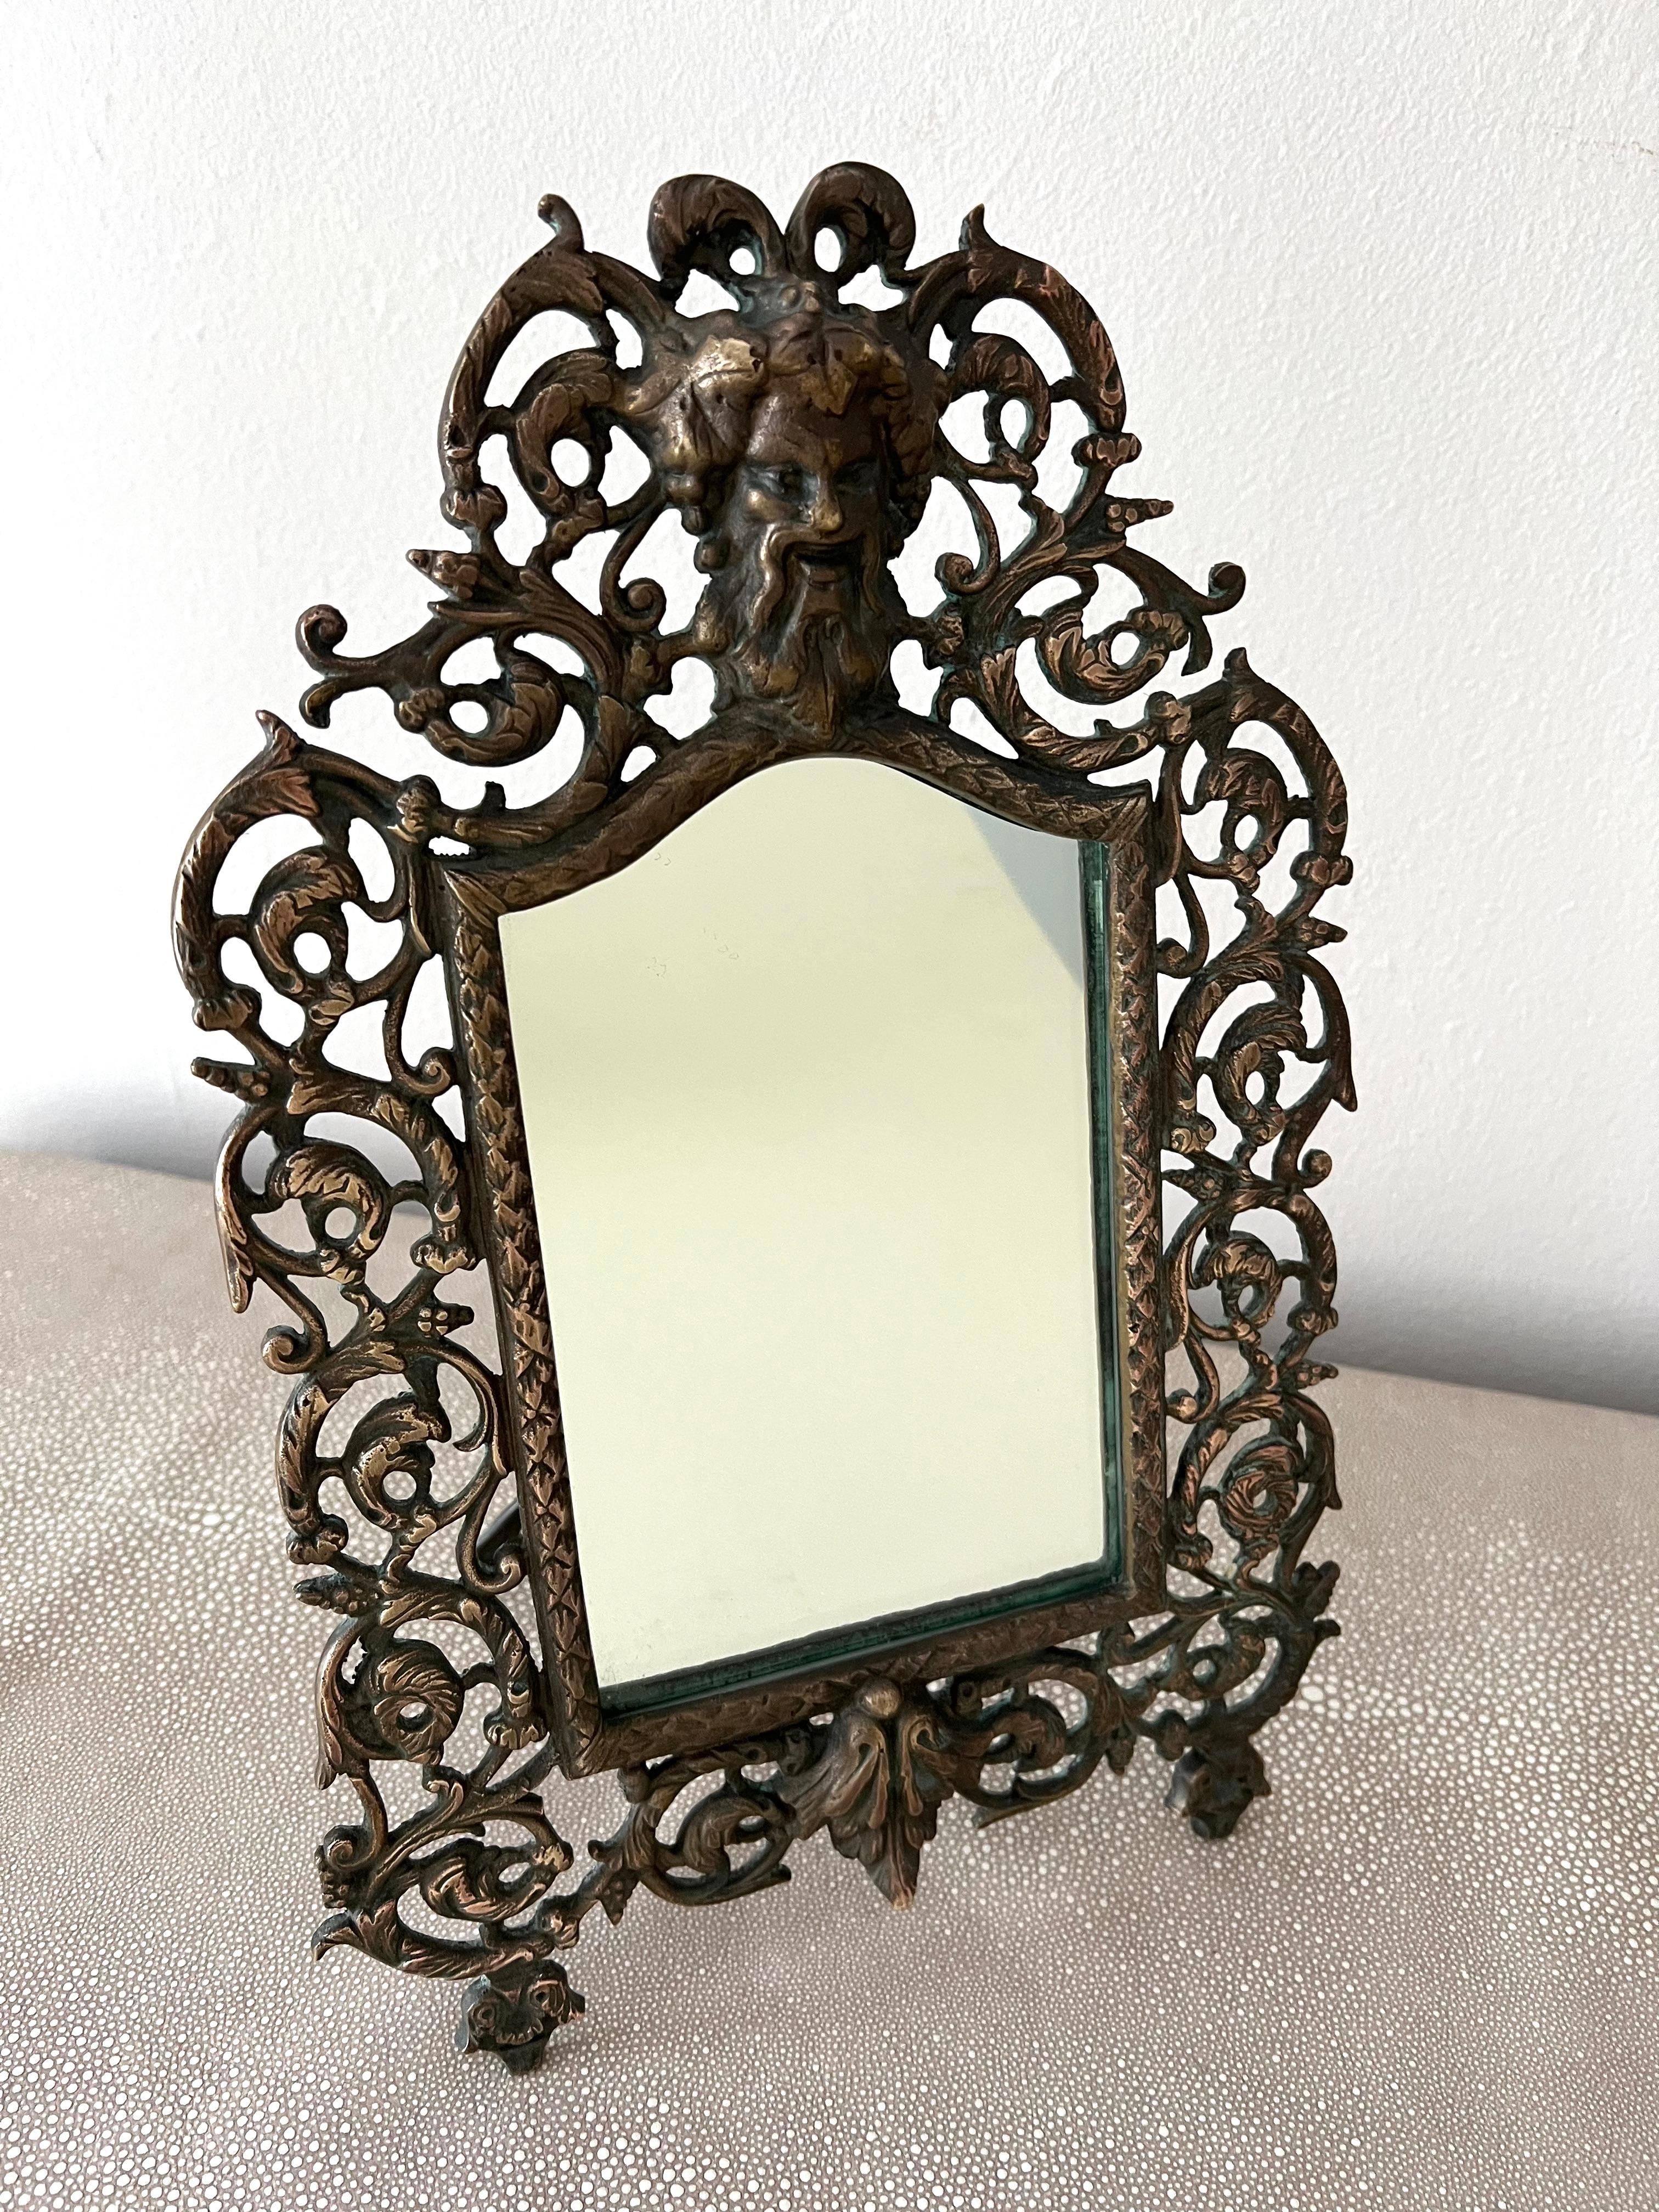 Brass and Copper P. E. Guerin Framed Mirror with Repousse Satyr For Sale 3